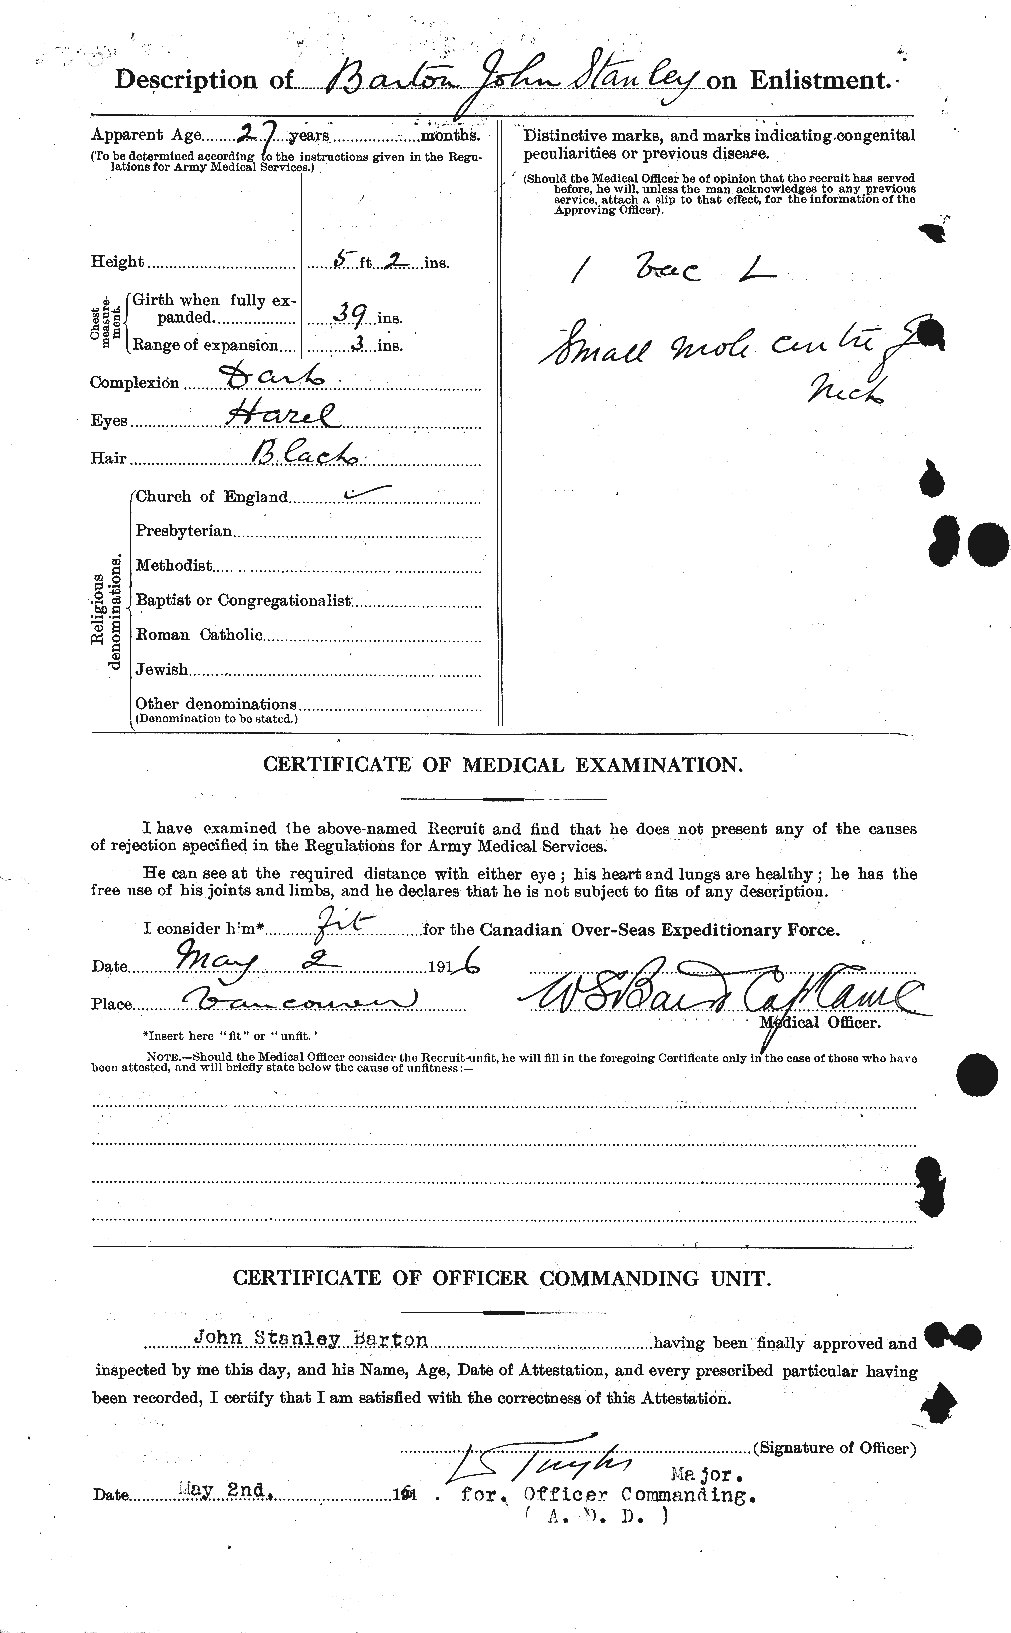 Personnel Records of the First World War - CEF 221392b